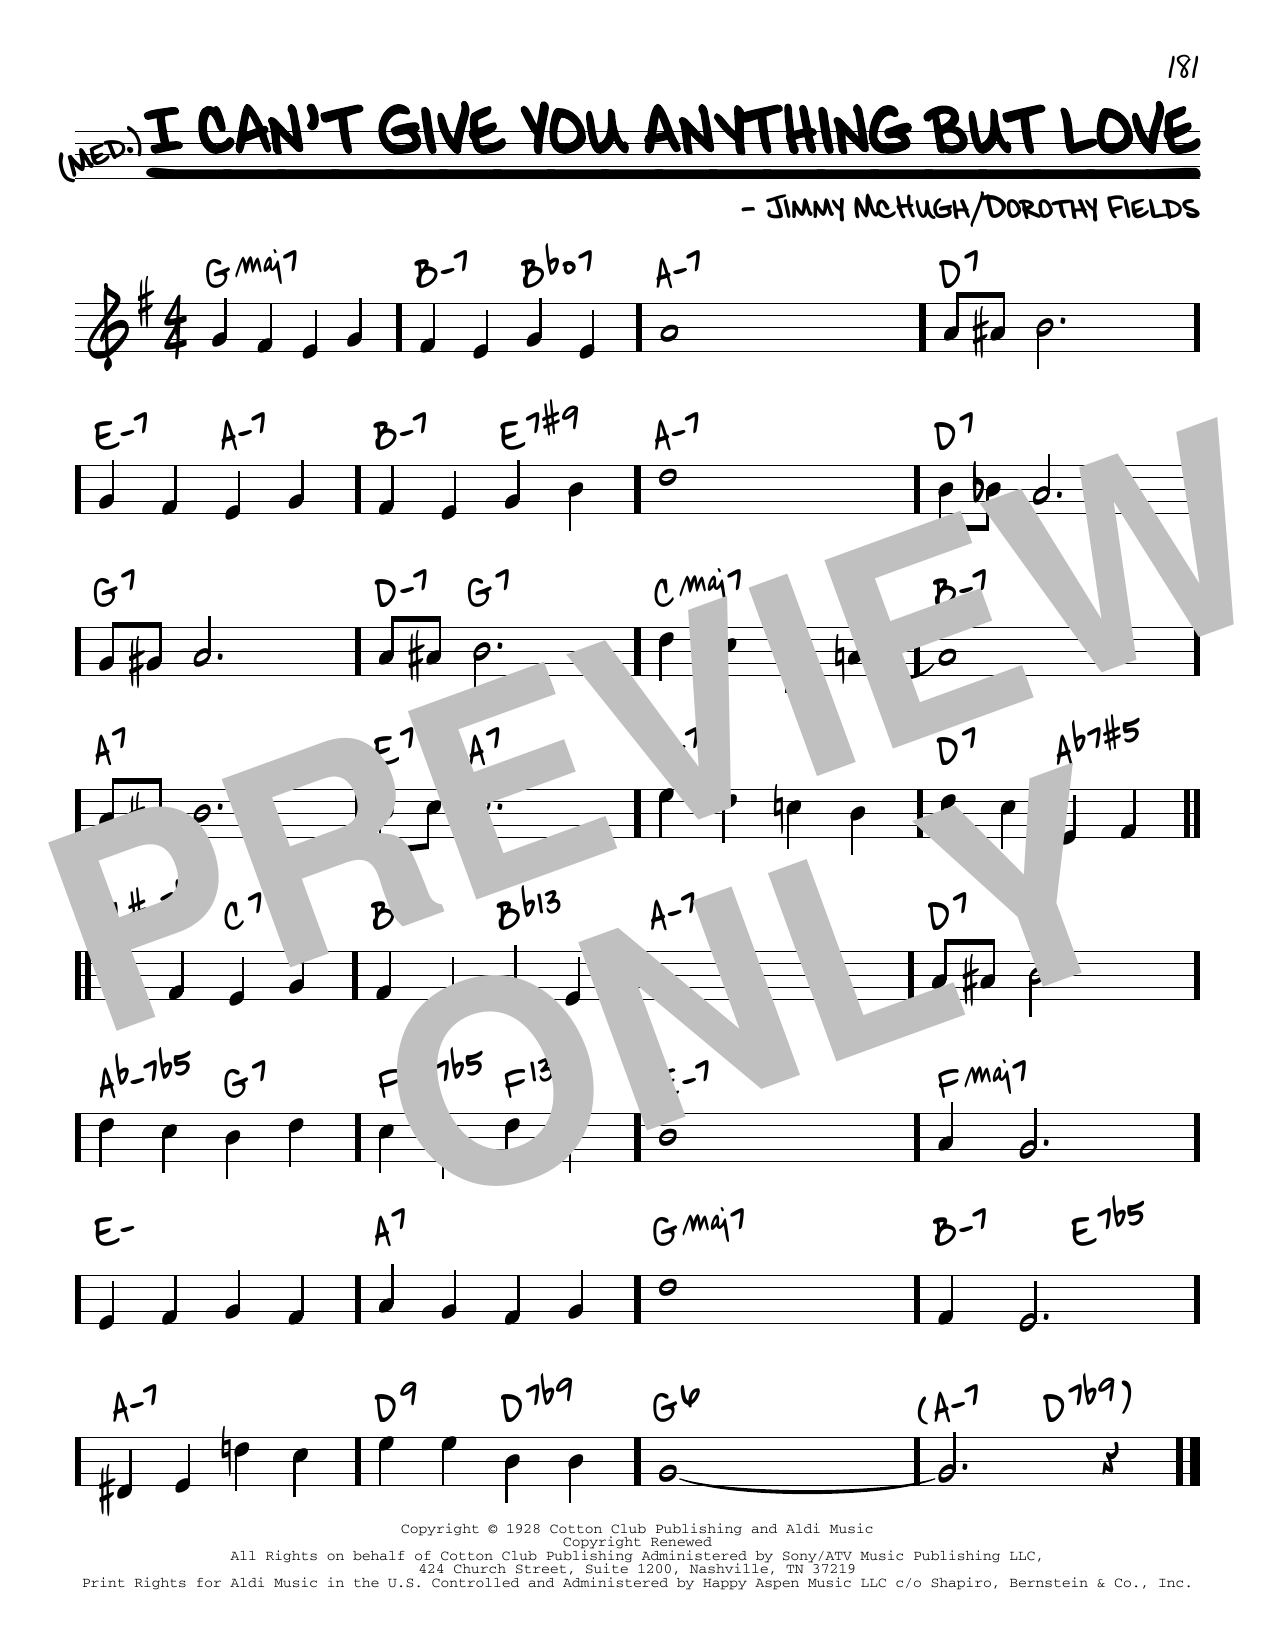 Download Jimmy McHugh and Dorothy Fields I Can't Give You Anything But Love [Reh Sheet Music